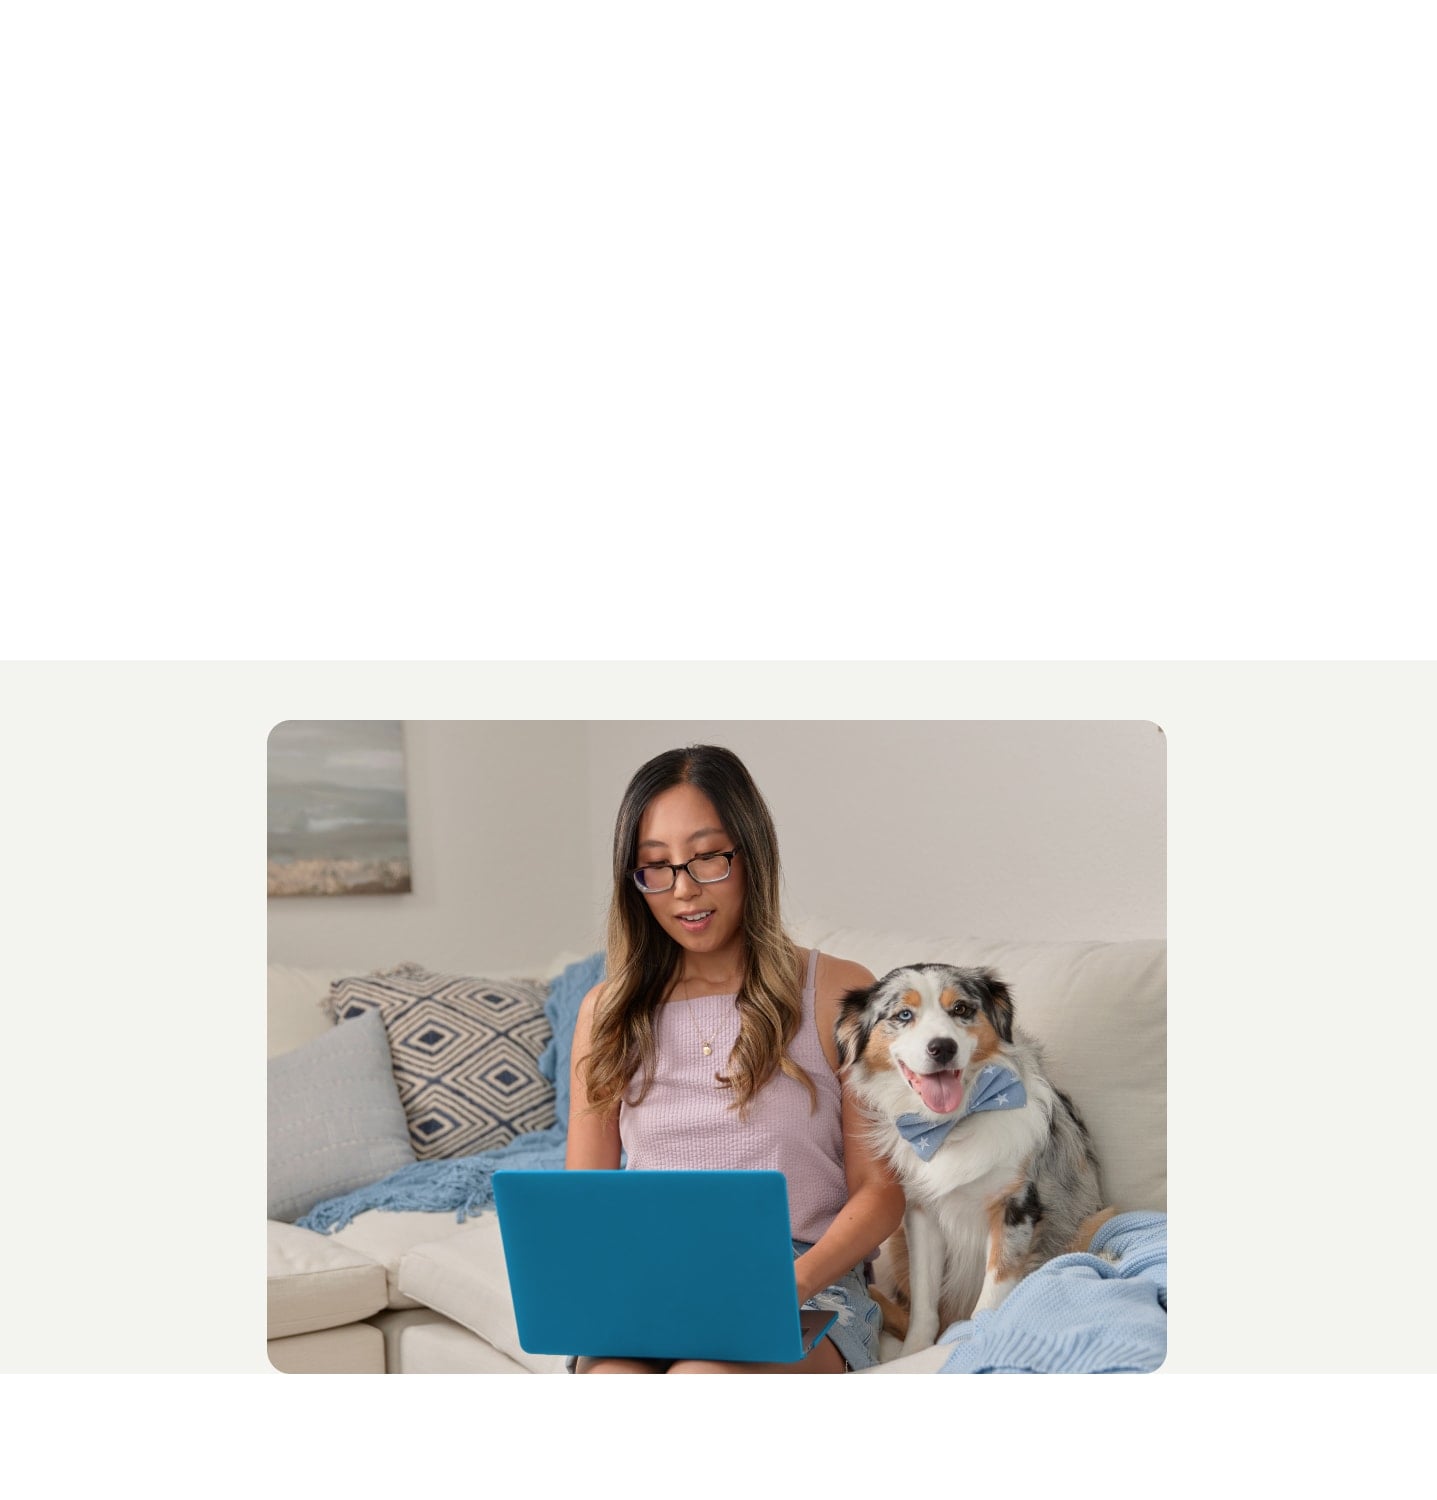 A TurboTax customer on her laptop sitting next to her dog on a couch.